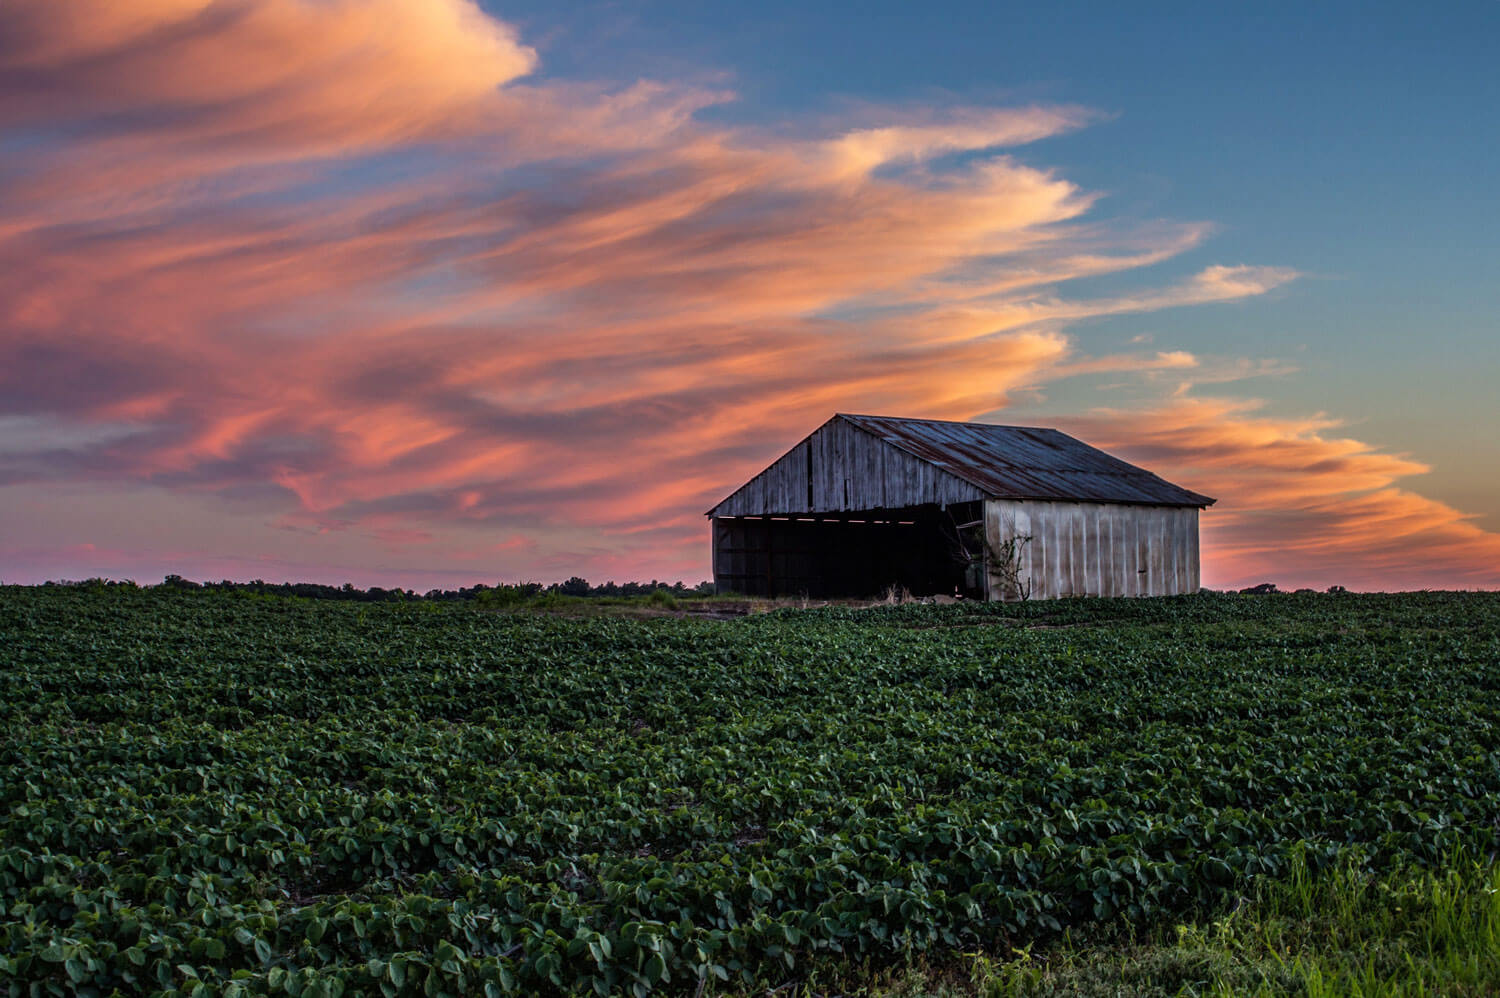 A peaceful Indiana farm scene at dusk, with a red barn and silo bathed in the warm glow of the setting sun.